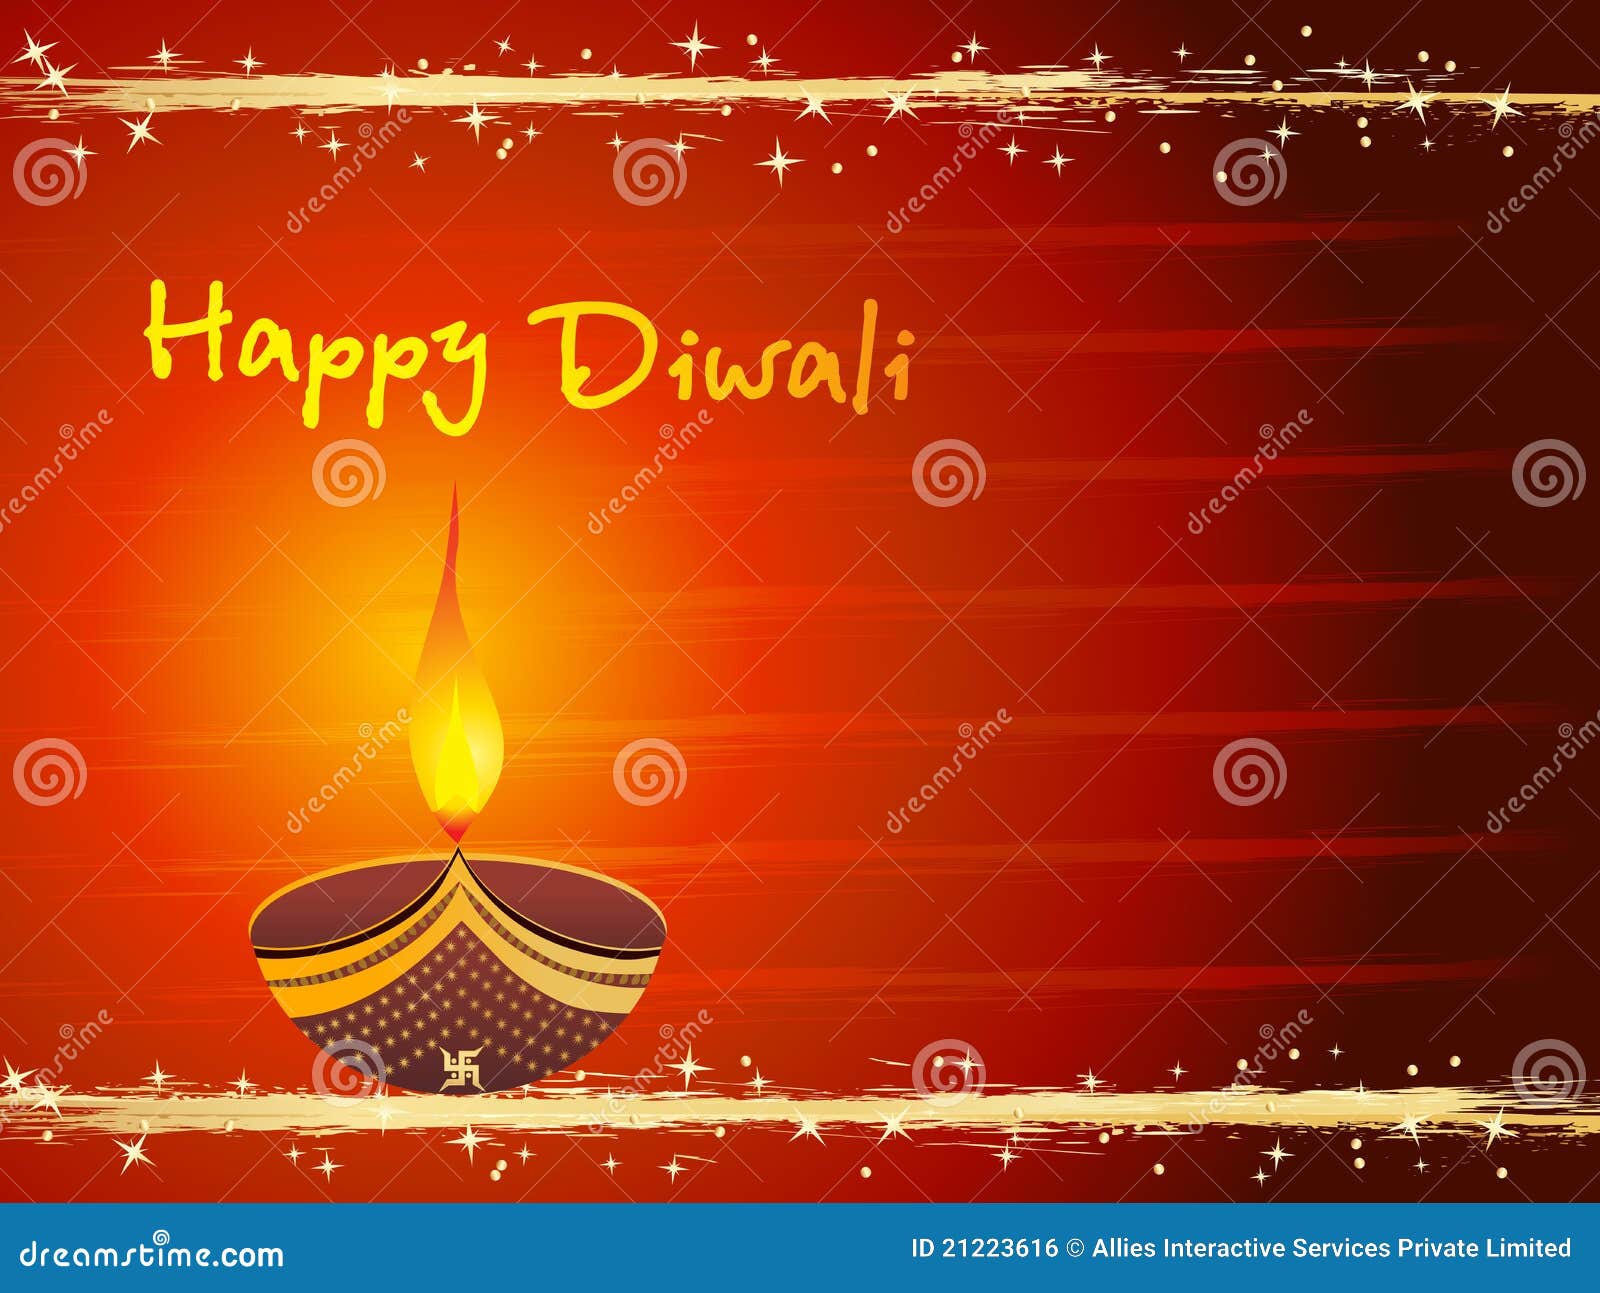 Greeting Card for Isolated Diwali Card Stock Vector - Illustration ...